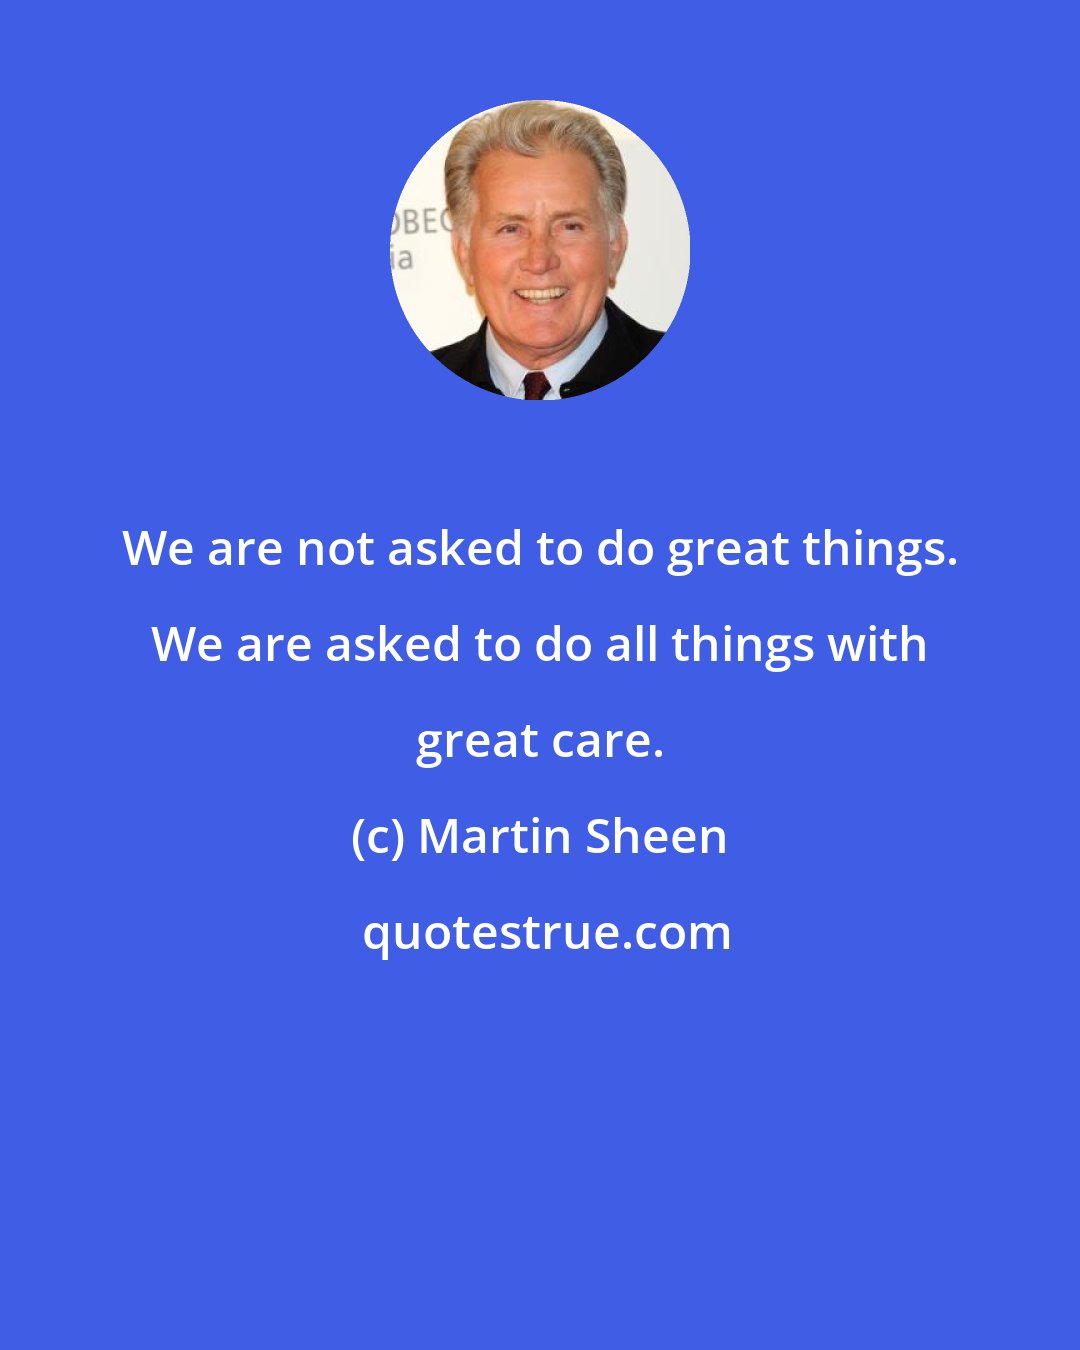 Martin Sheen: We are not asked to do great things. We are asked to do all things with great care.